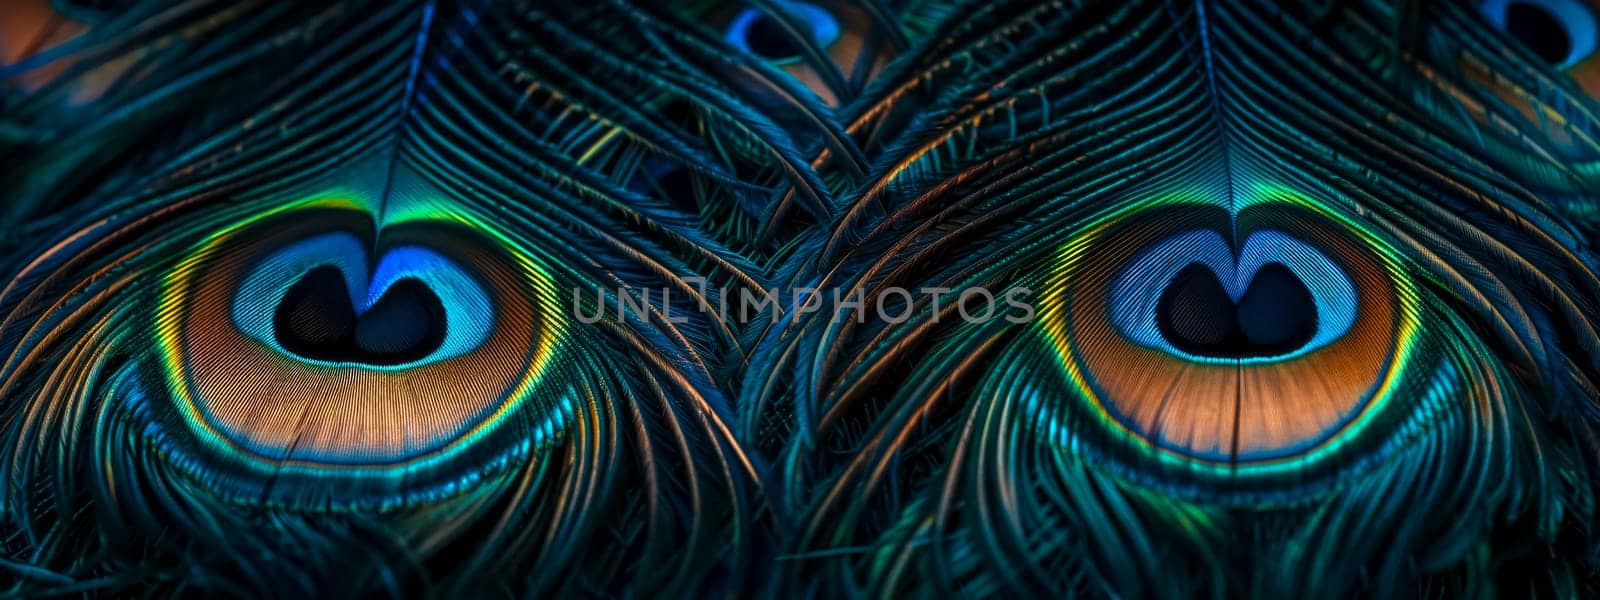 Detailed image of colorful peacock feathers, showcasing their natural iridescence by Edophoto